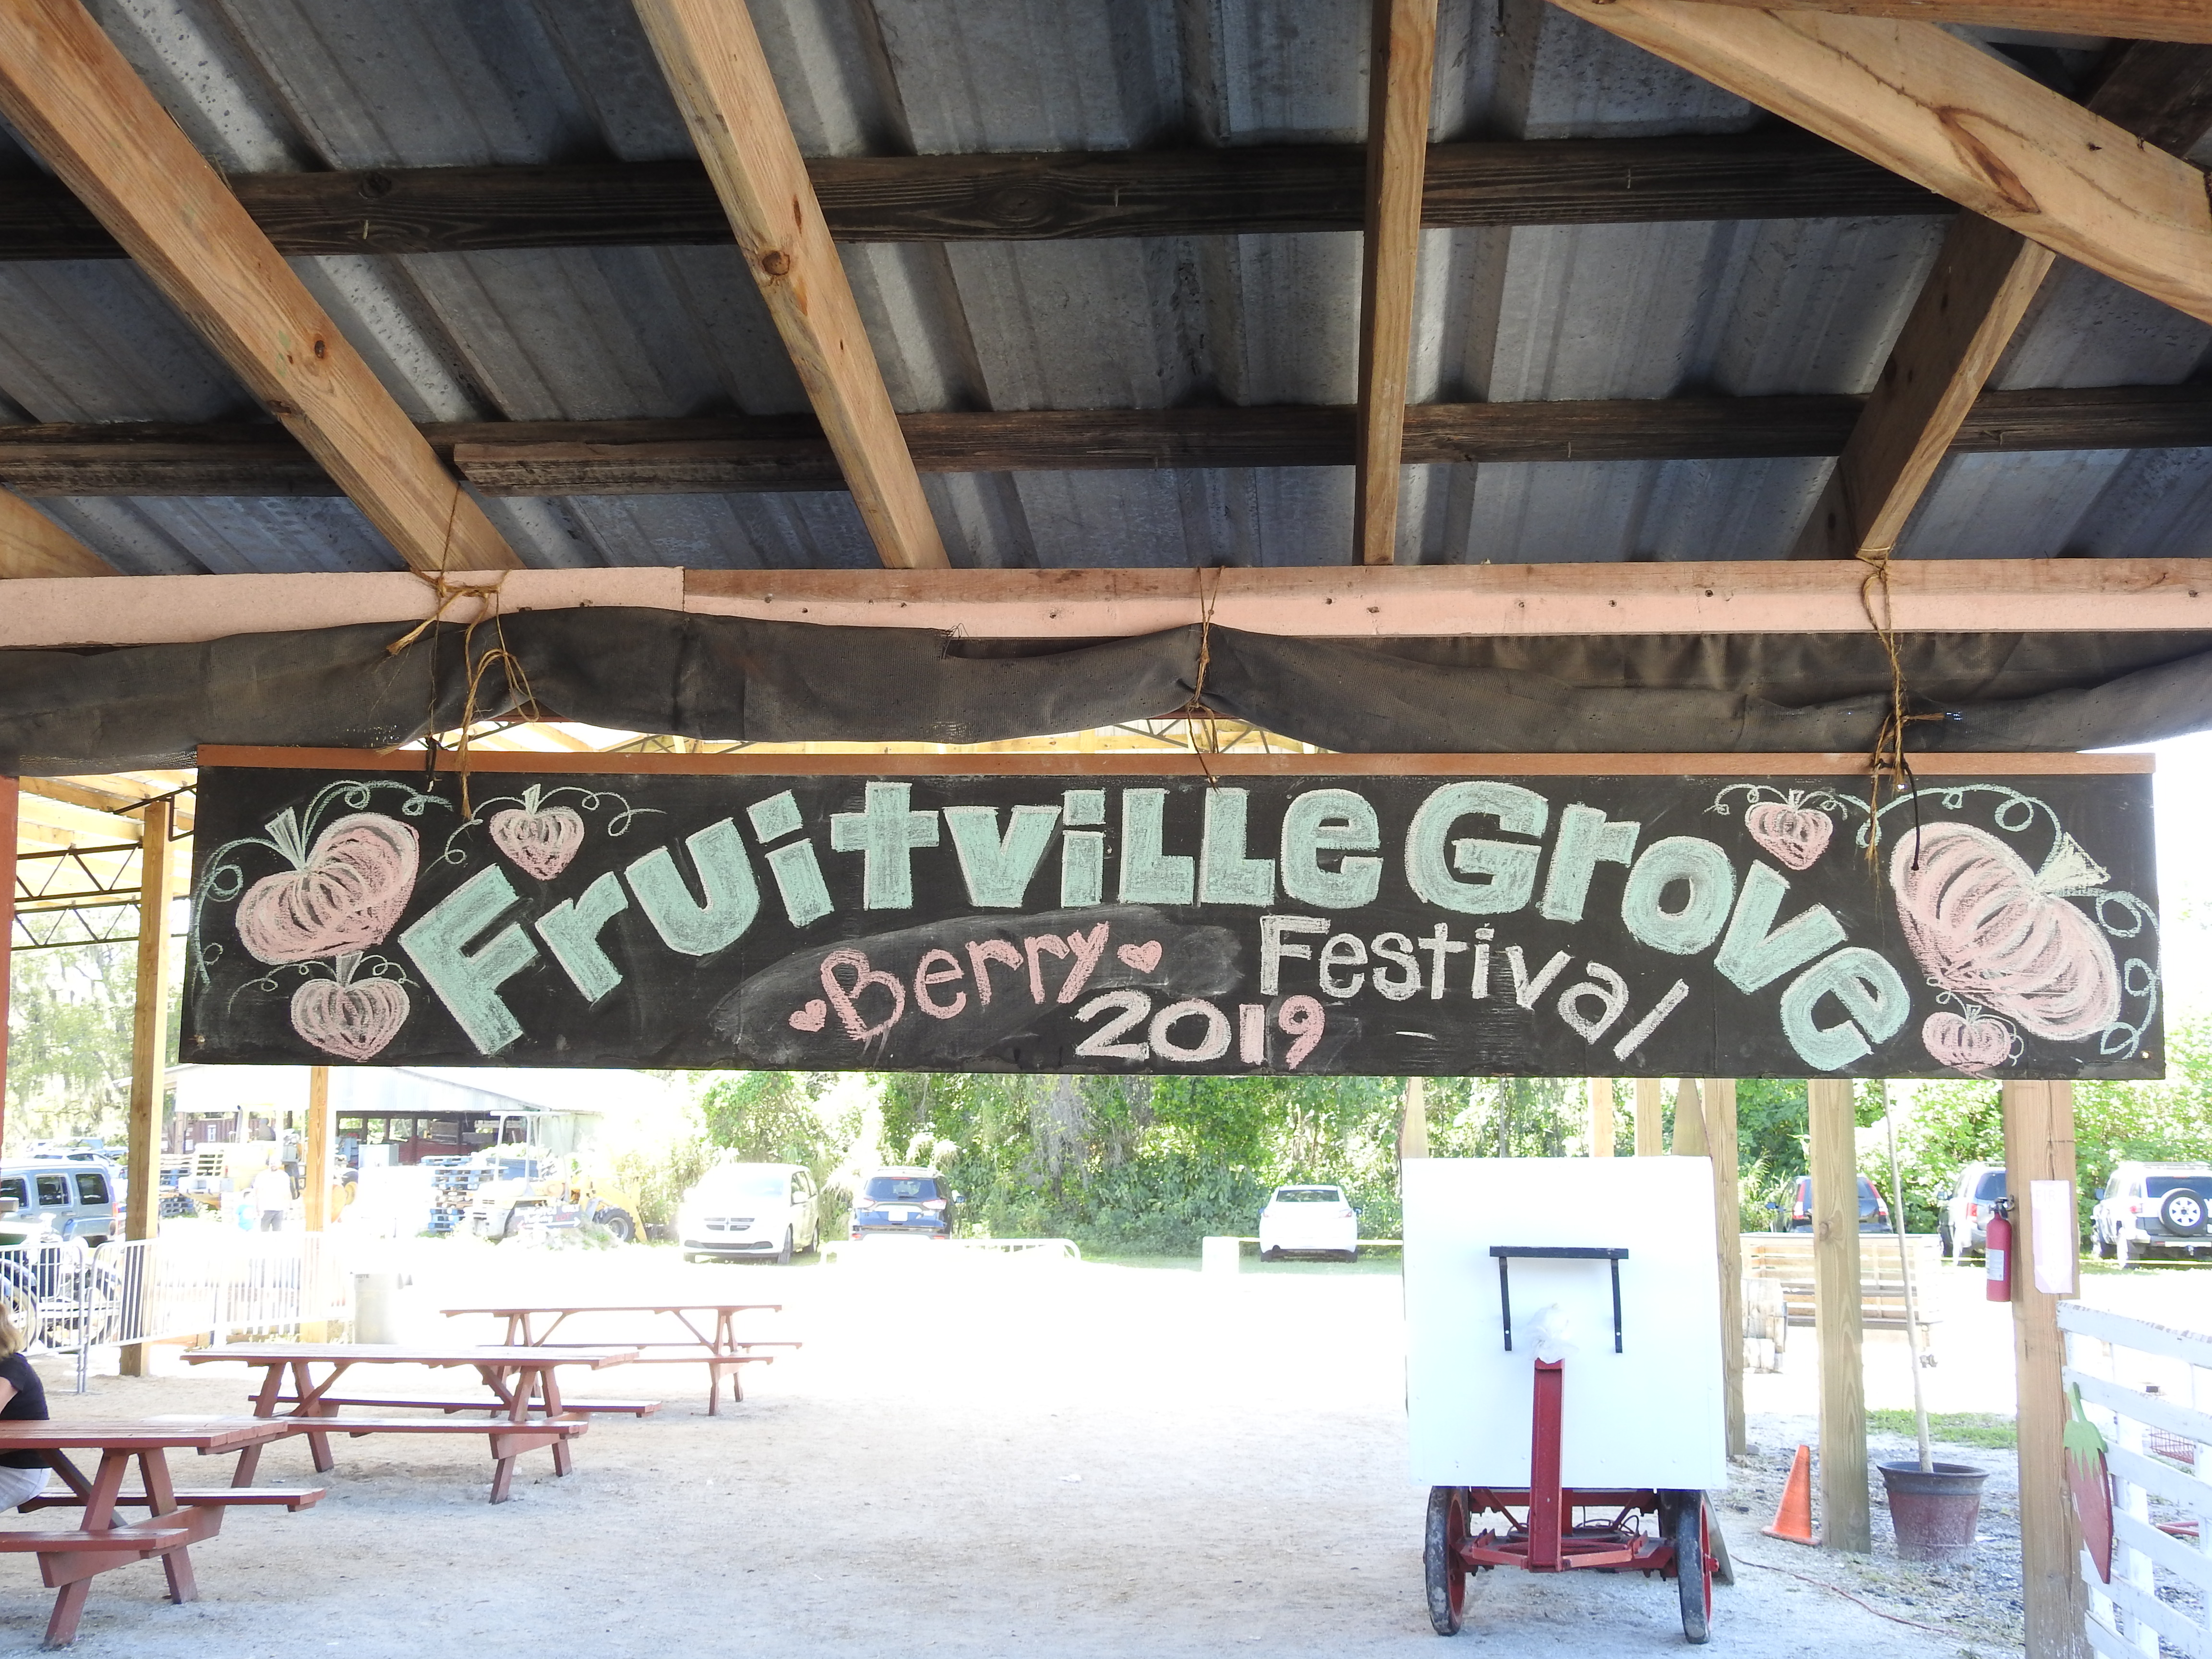 Family fun and berries galore at Fruitville Grove